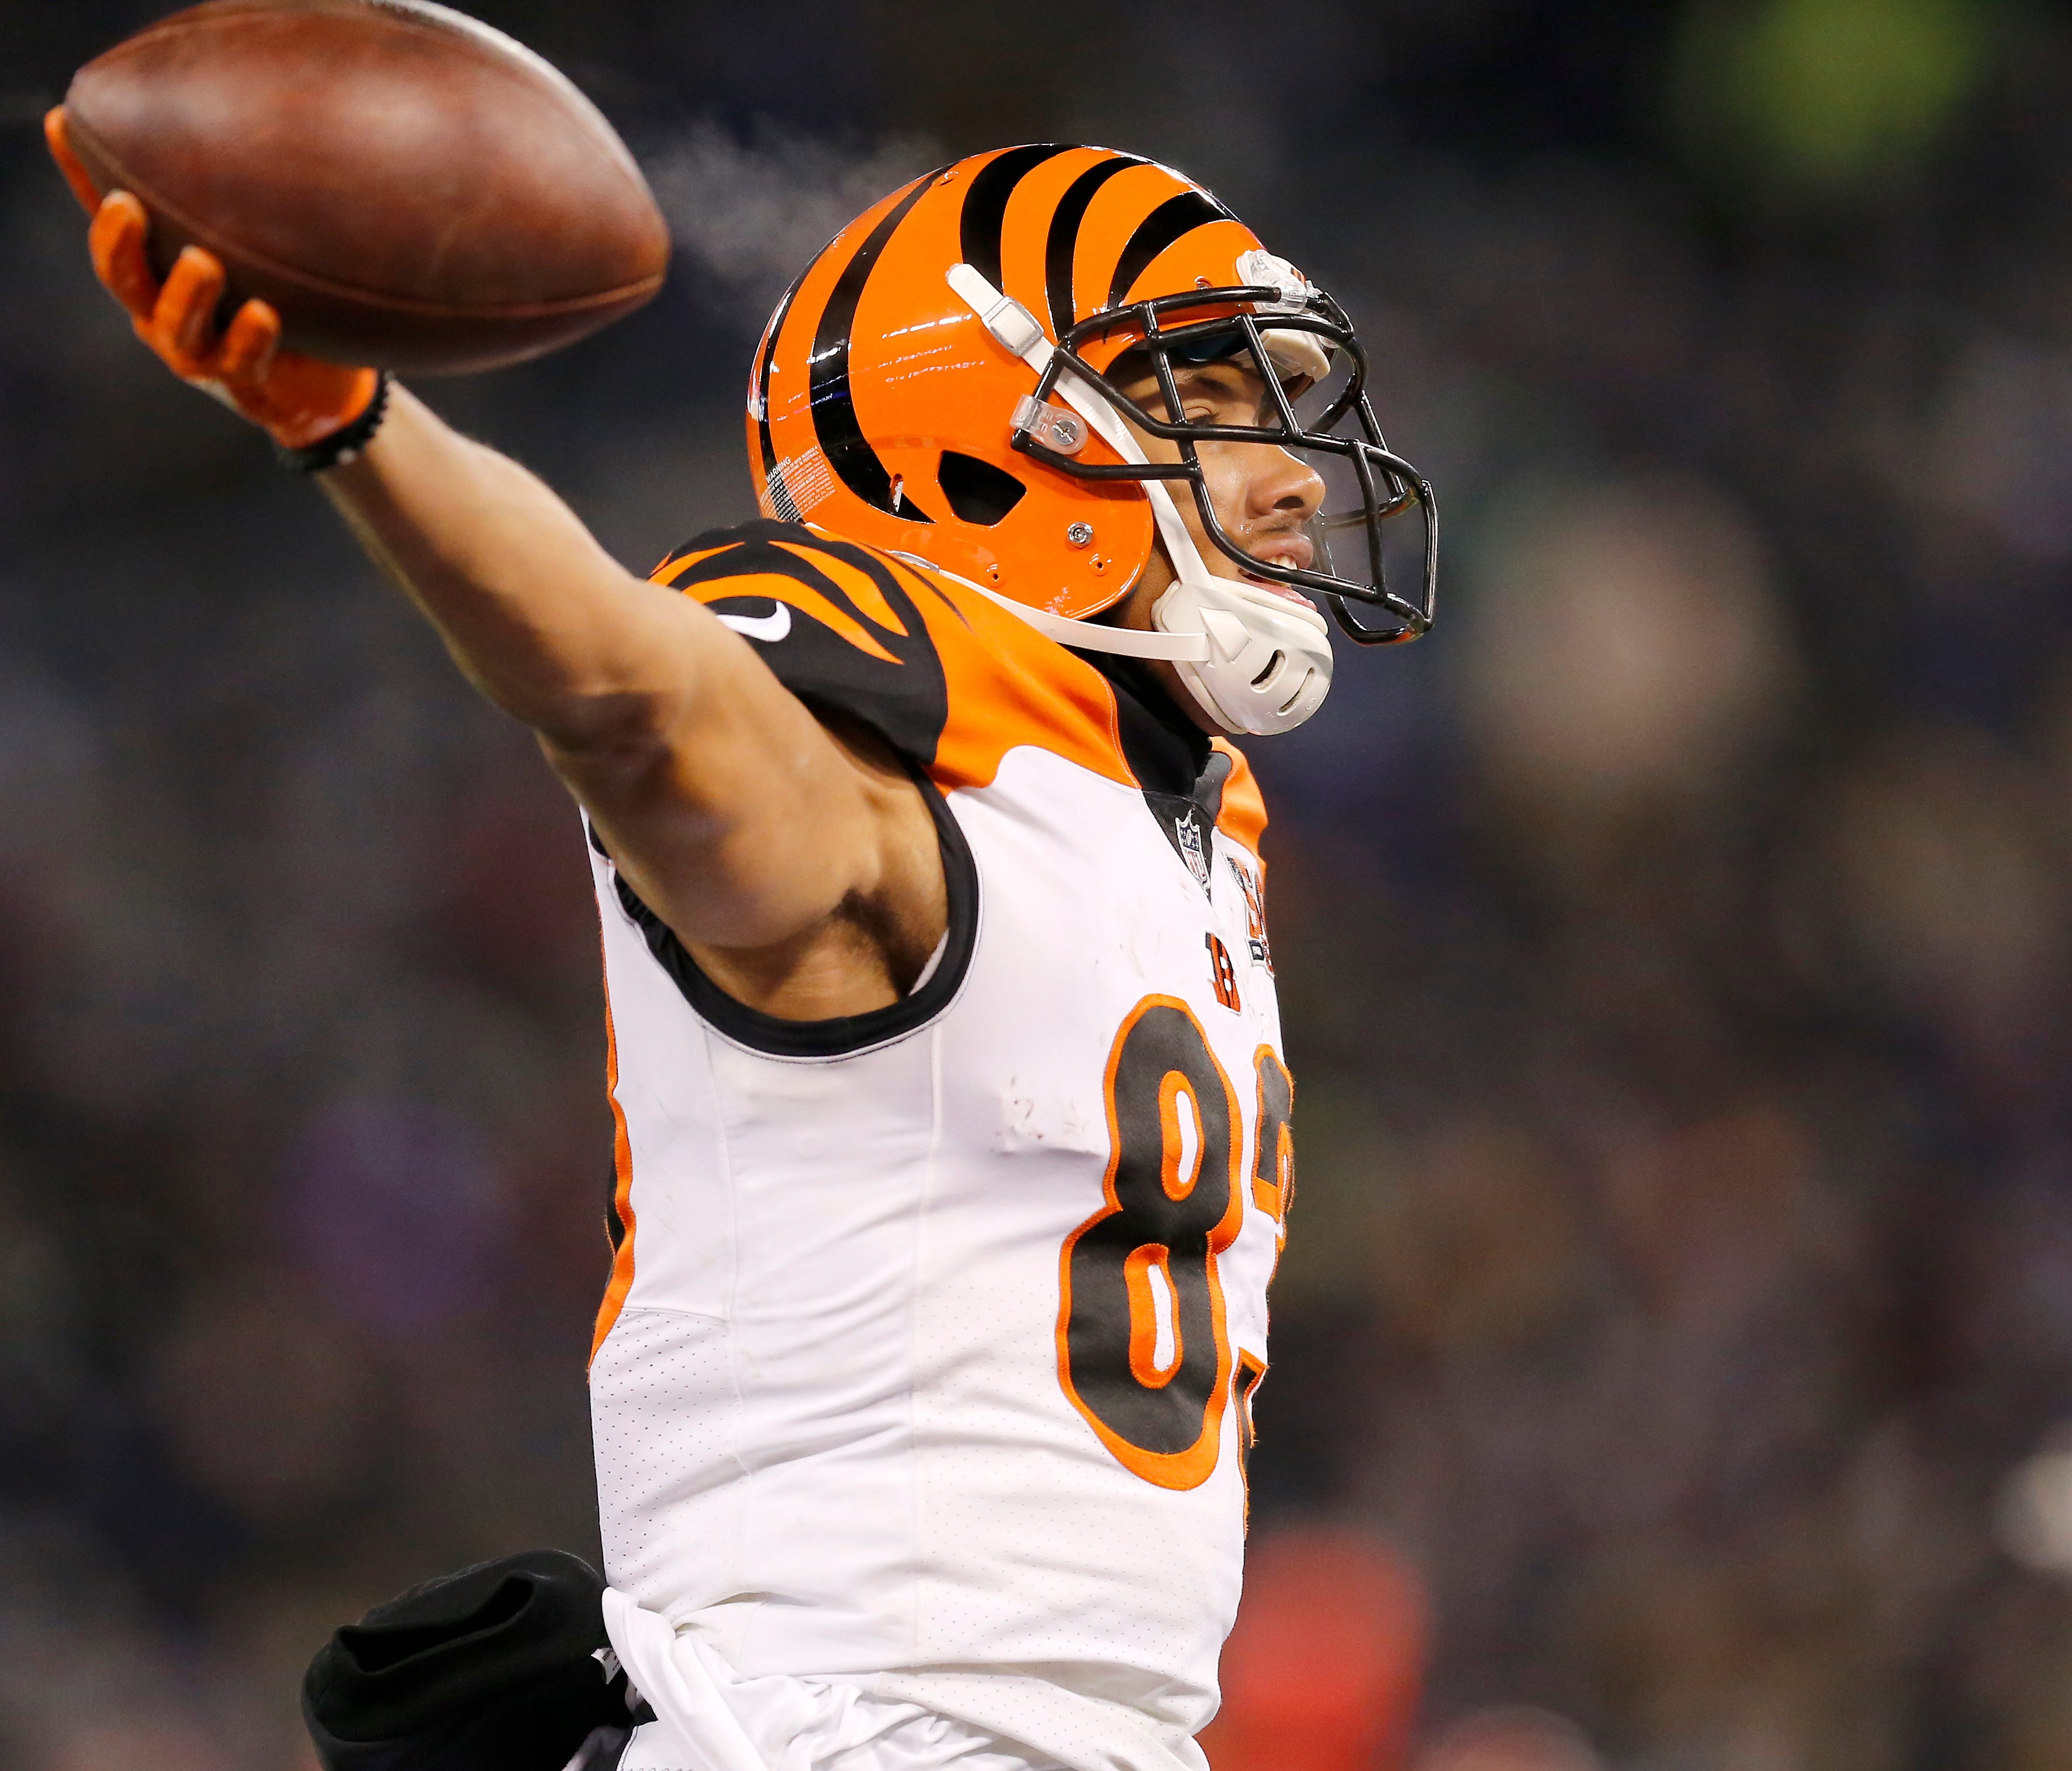 Cincinnati Bengals wide receiver Tyler Boyd (83) throws his hands up as he crosses into the end zone for a game winning touchdown in the fourth quarter of the NFL Week 17 game between the Baltimore Ravens and the Cincinnati Bengals at M&T Bank Stadiu